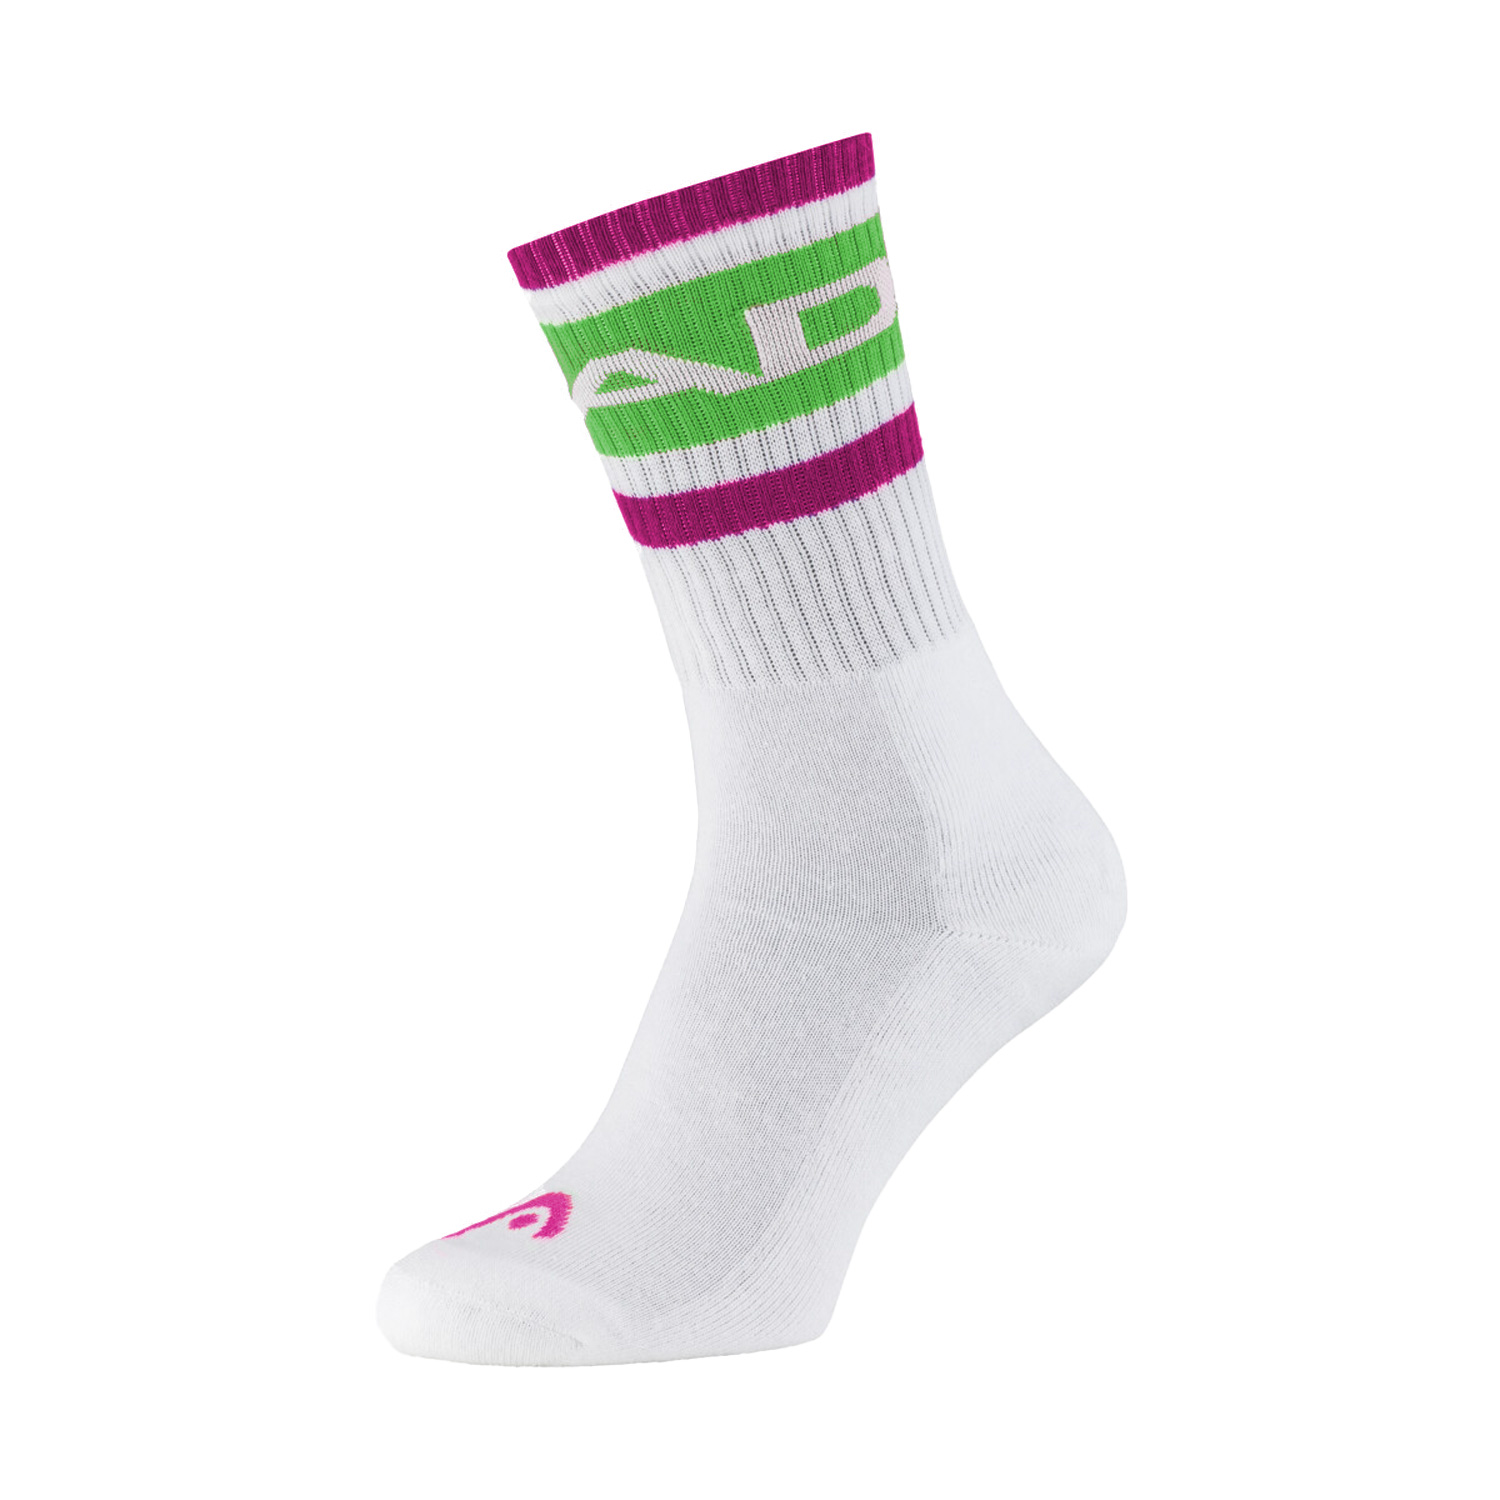 Head Performance Crew Calcetines - Candy Green/Vivid Pink